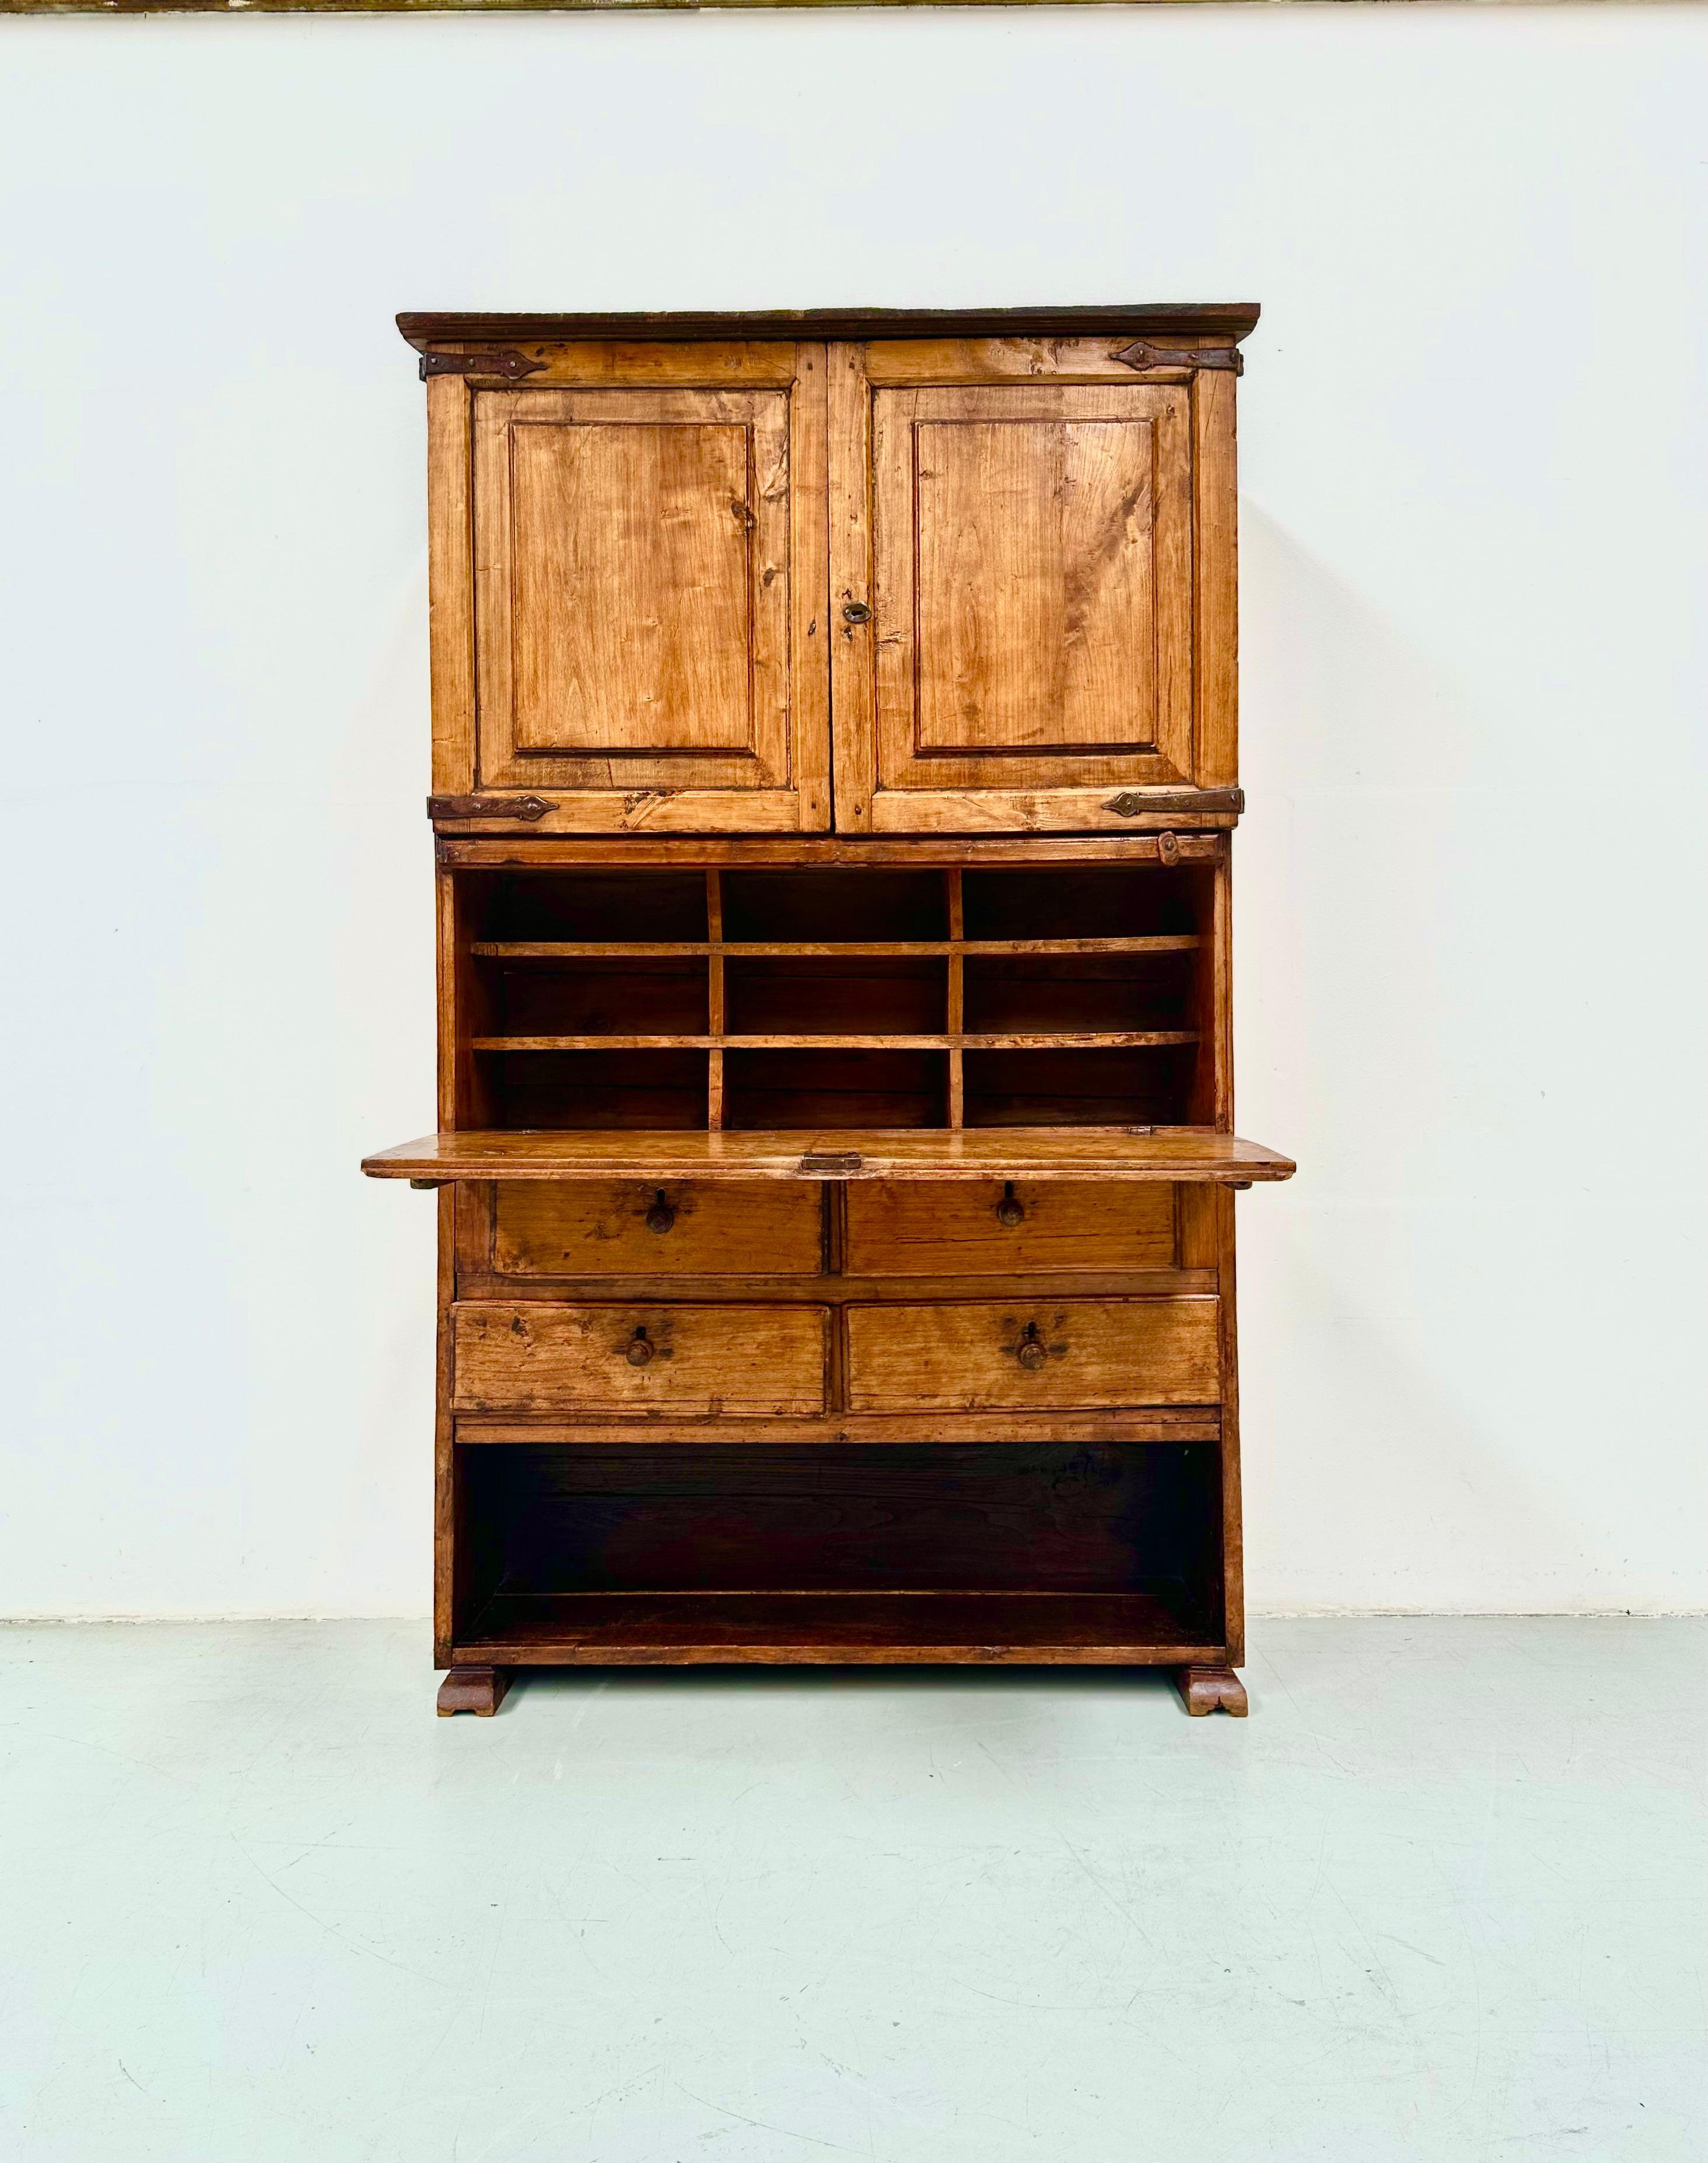 This secretary cabinet was handmade in Spain from fruitwood. Manufactured  around 1860 considering the forged nails and the ironwork. In very nice condition. Great patina in the wood. And no structural issues.